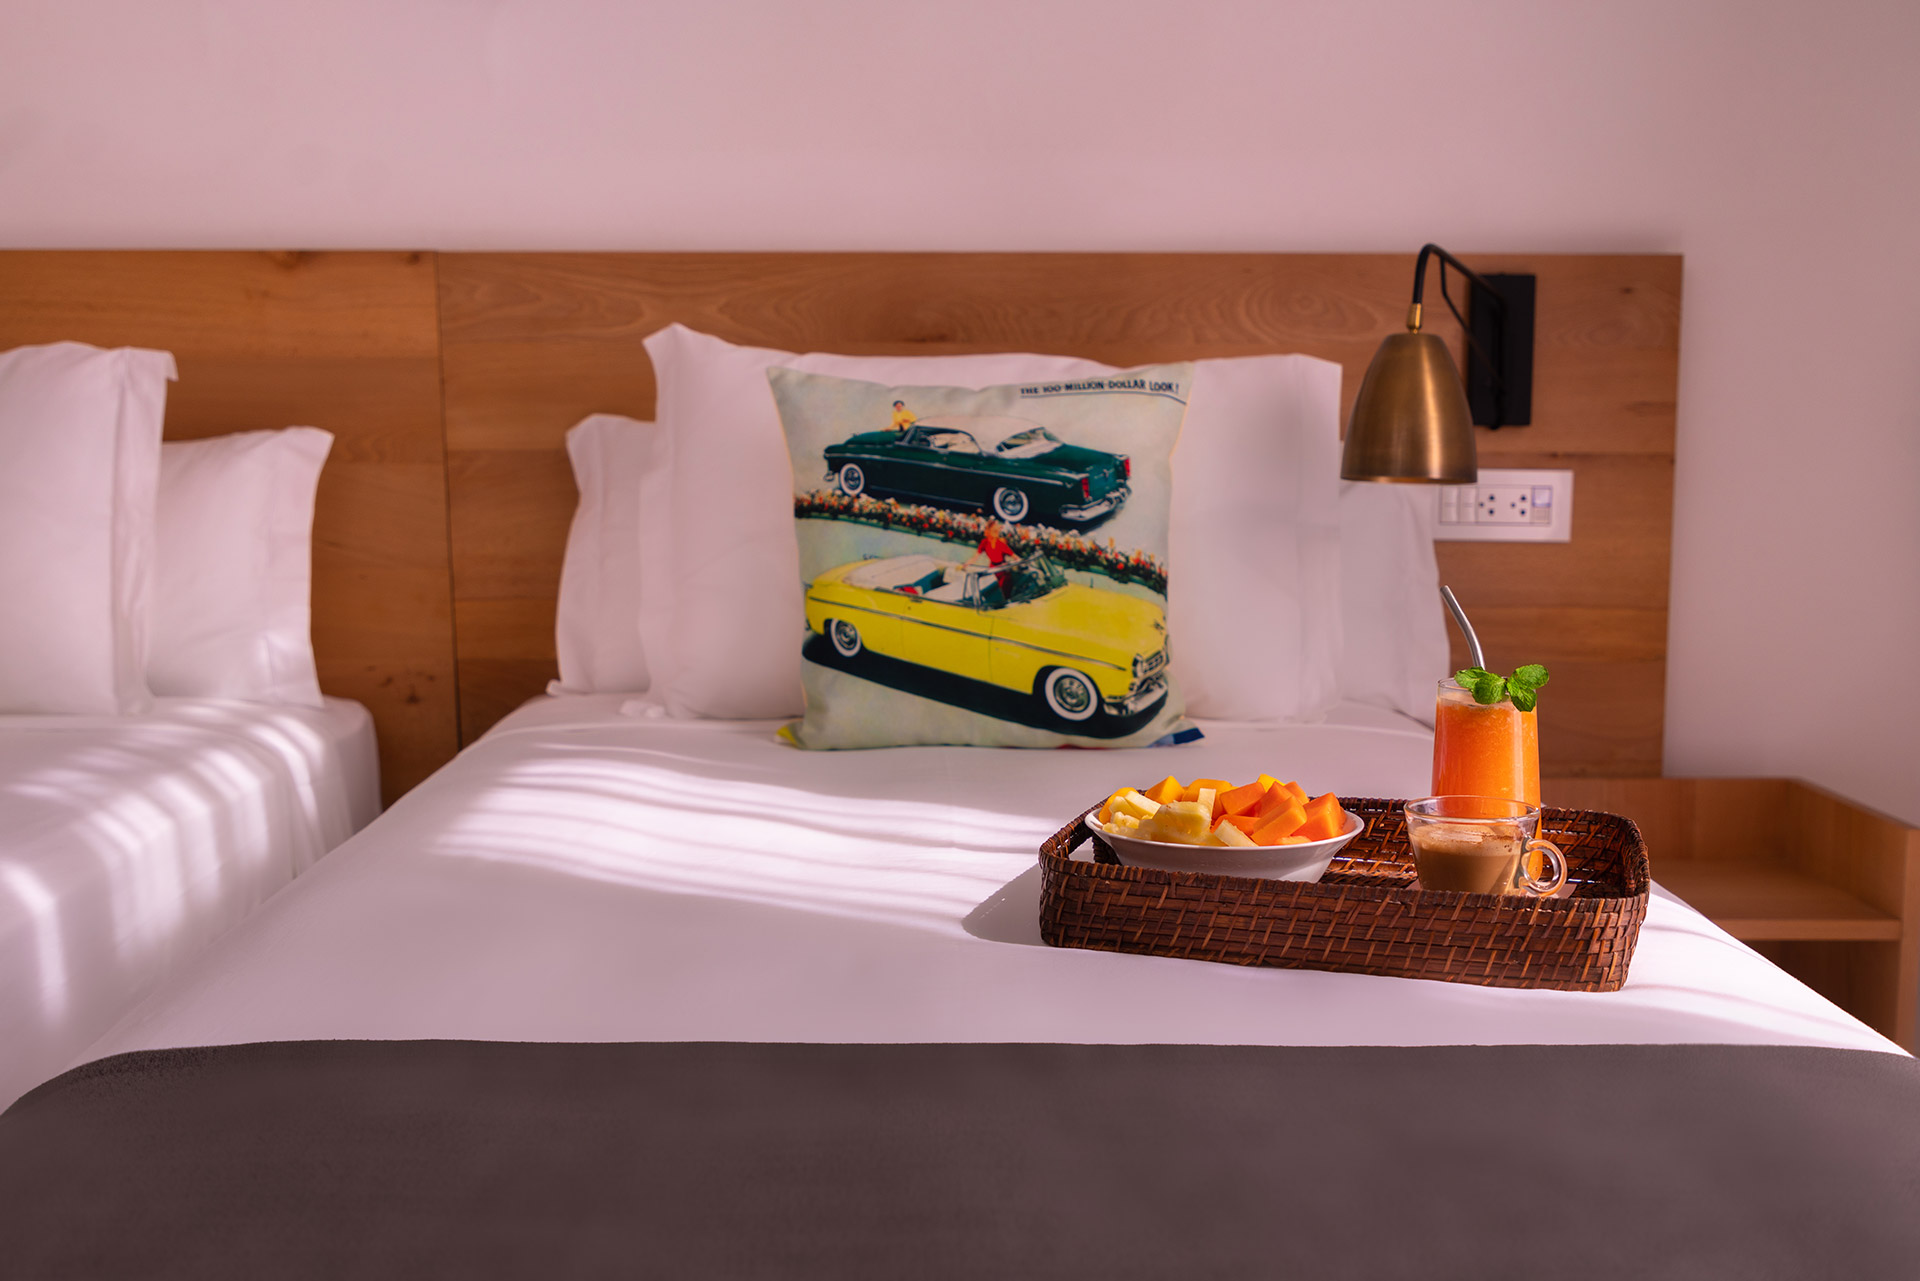 breakfast in bed confortable room classic american car